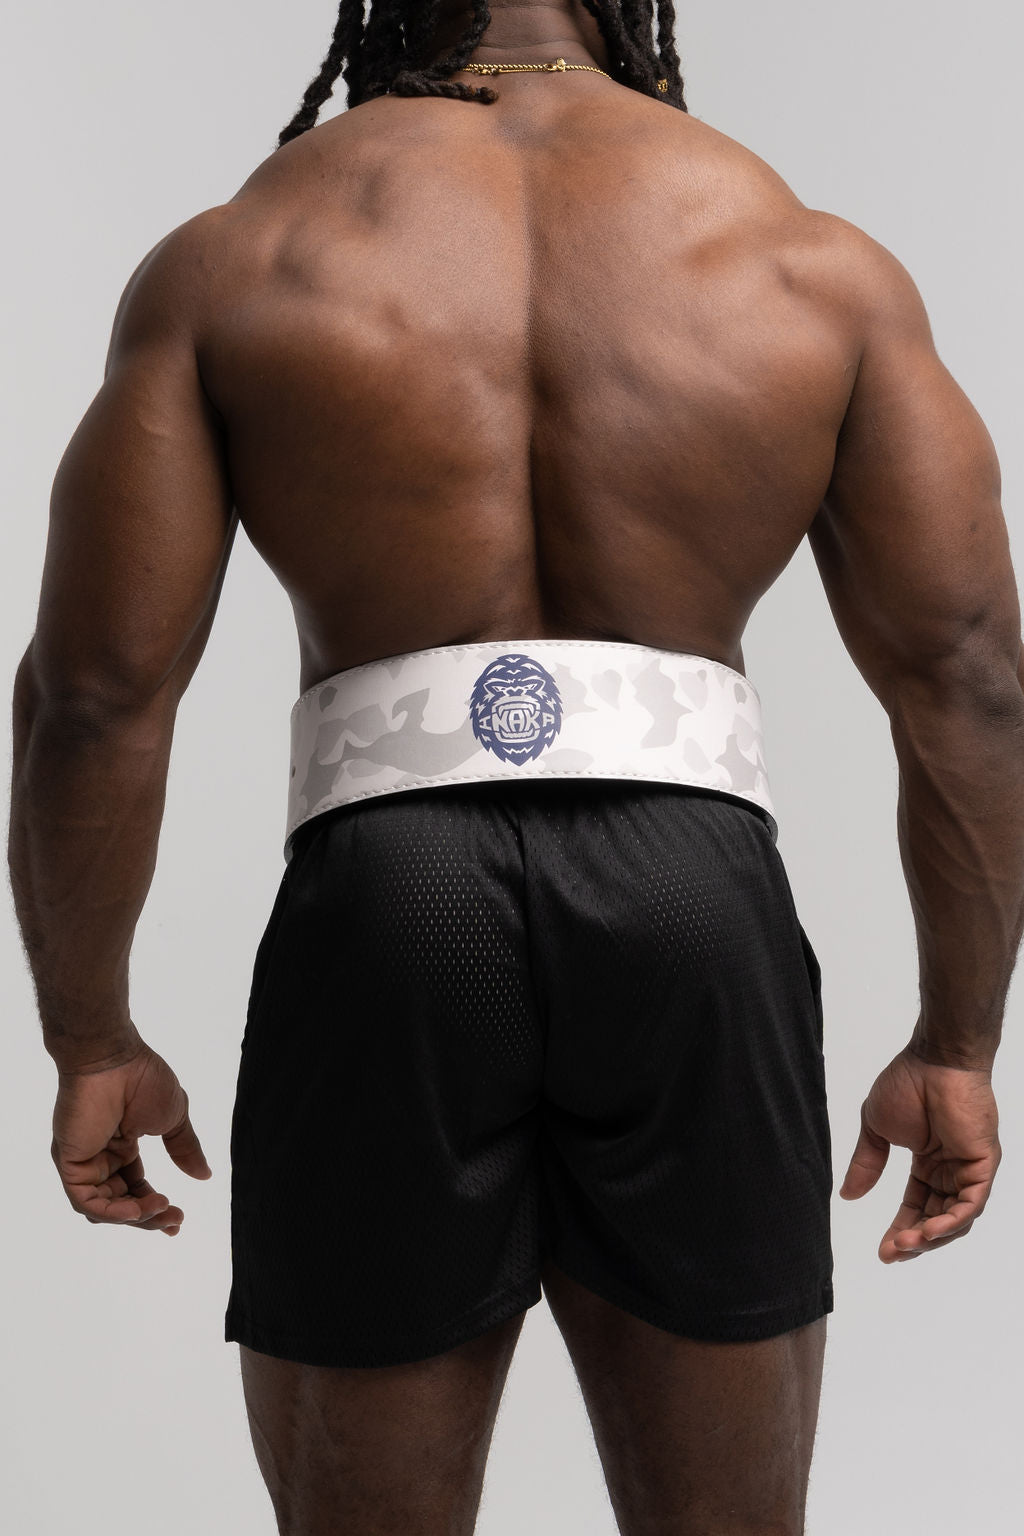 Stoic Lever Powerlifting Belt (13mm) - White - Lift Unlimited 